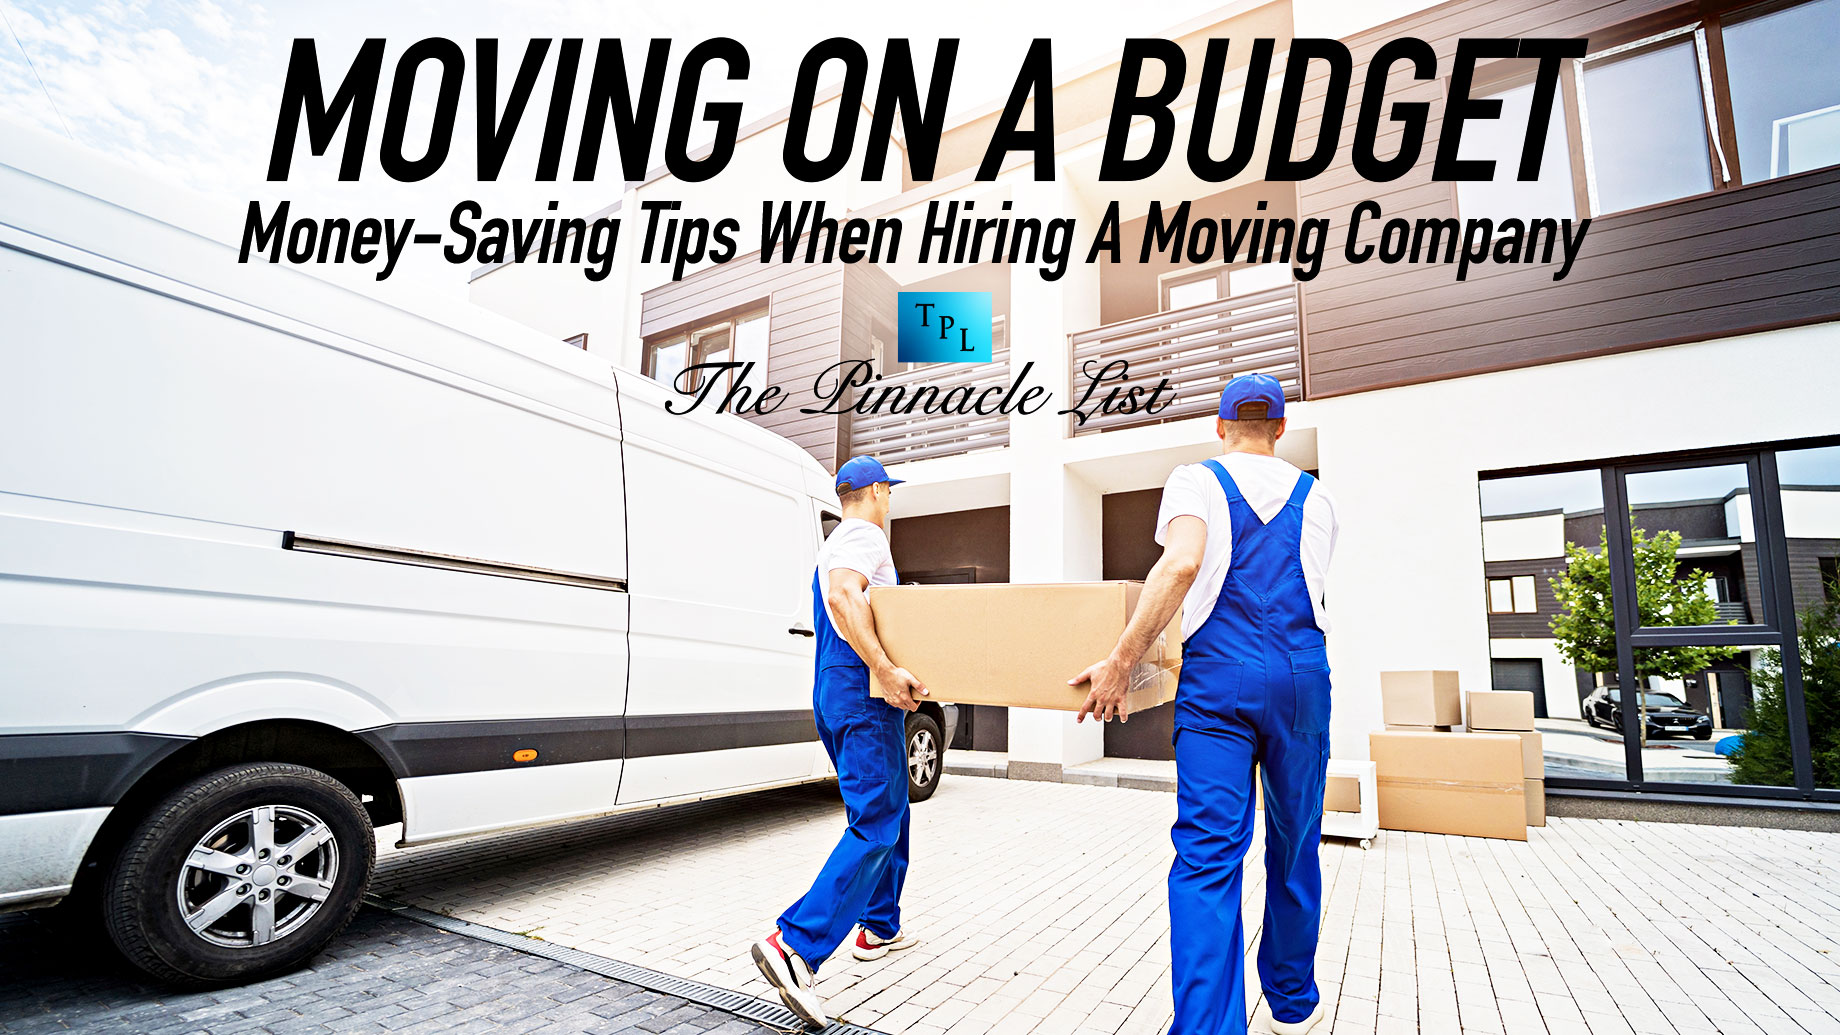 Moving On A Budget: Money-Saving Tips When Hiring A Moving Company